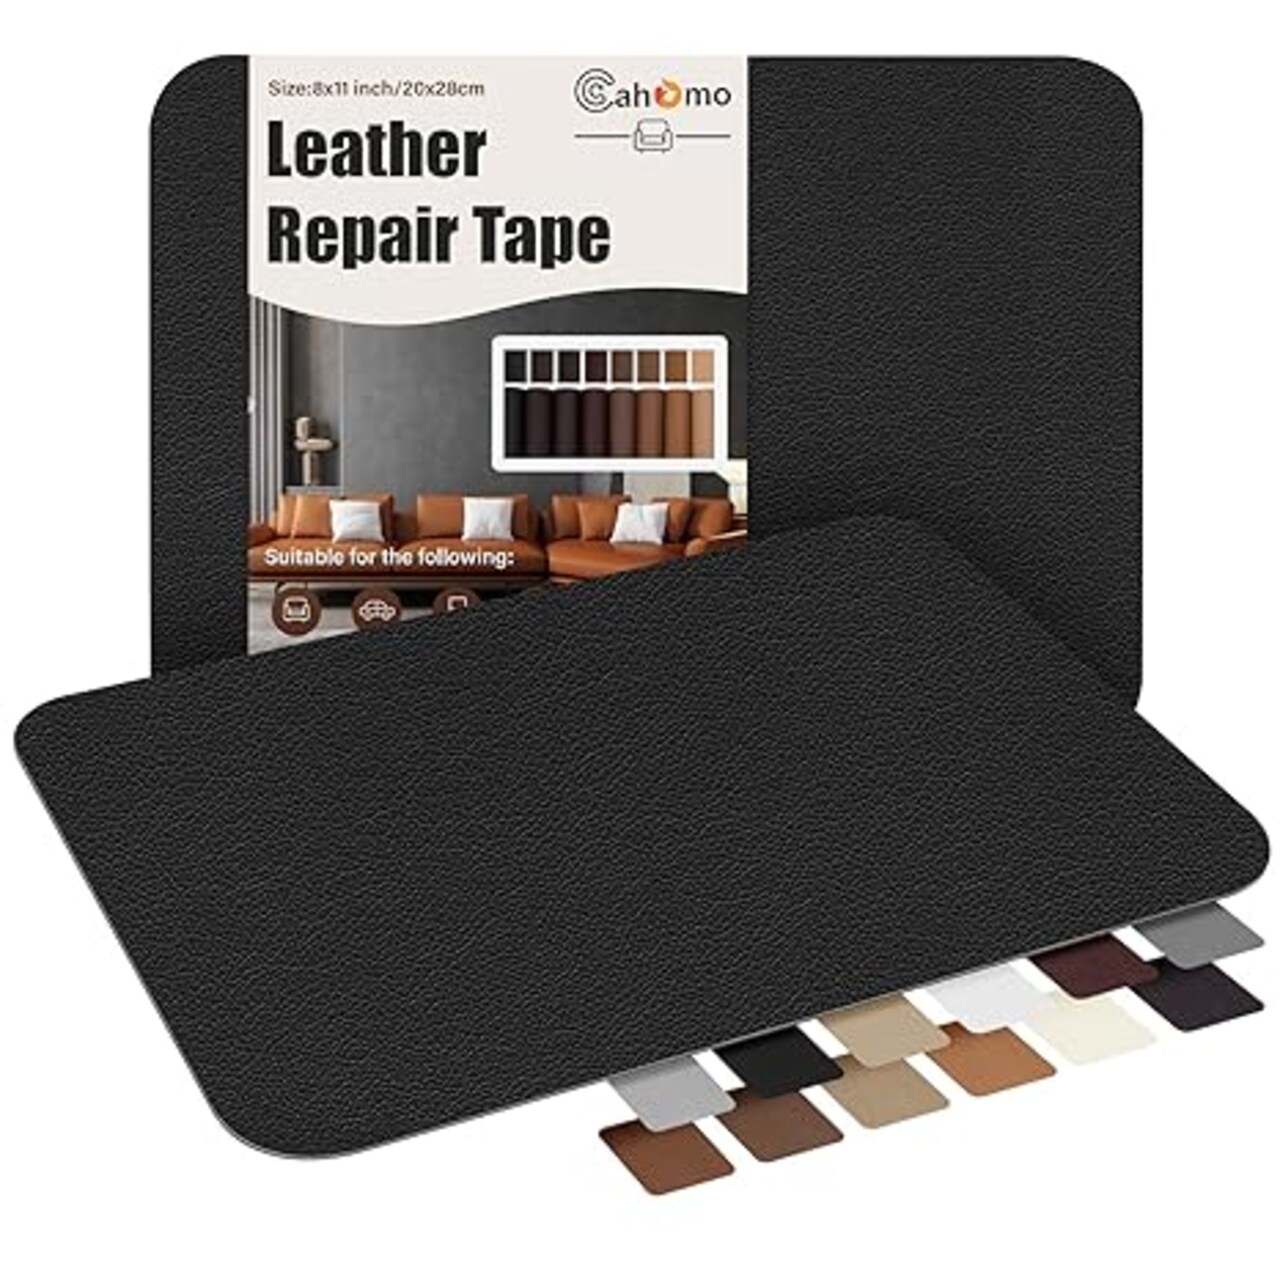 Cahomo Black Self-Adhesive 8.50 x 11 Leather Repair Patches